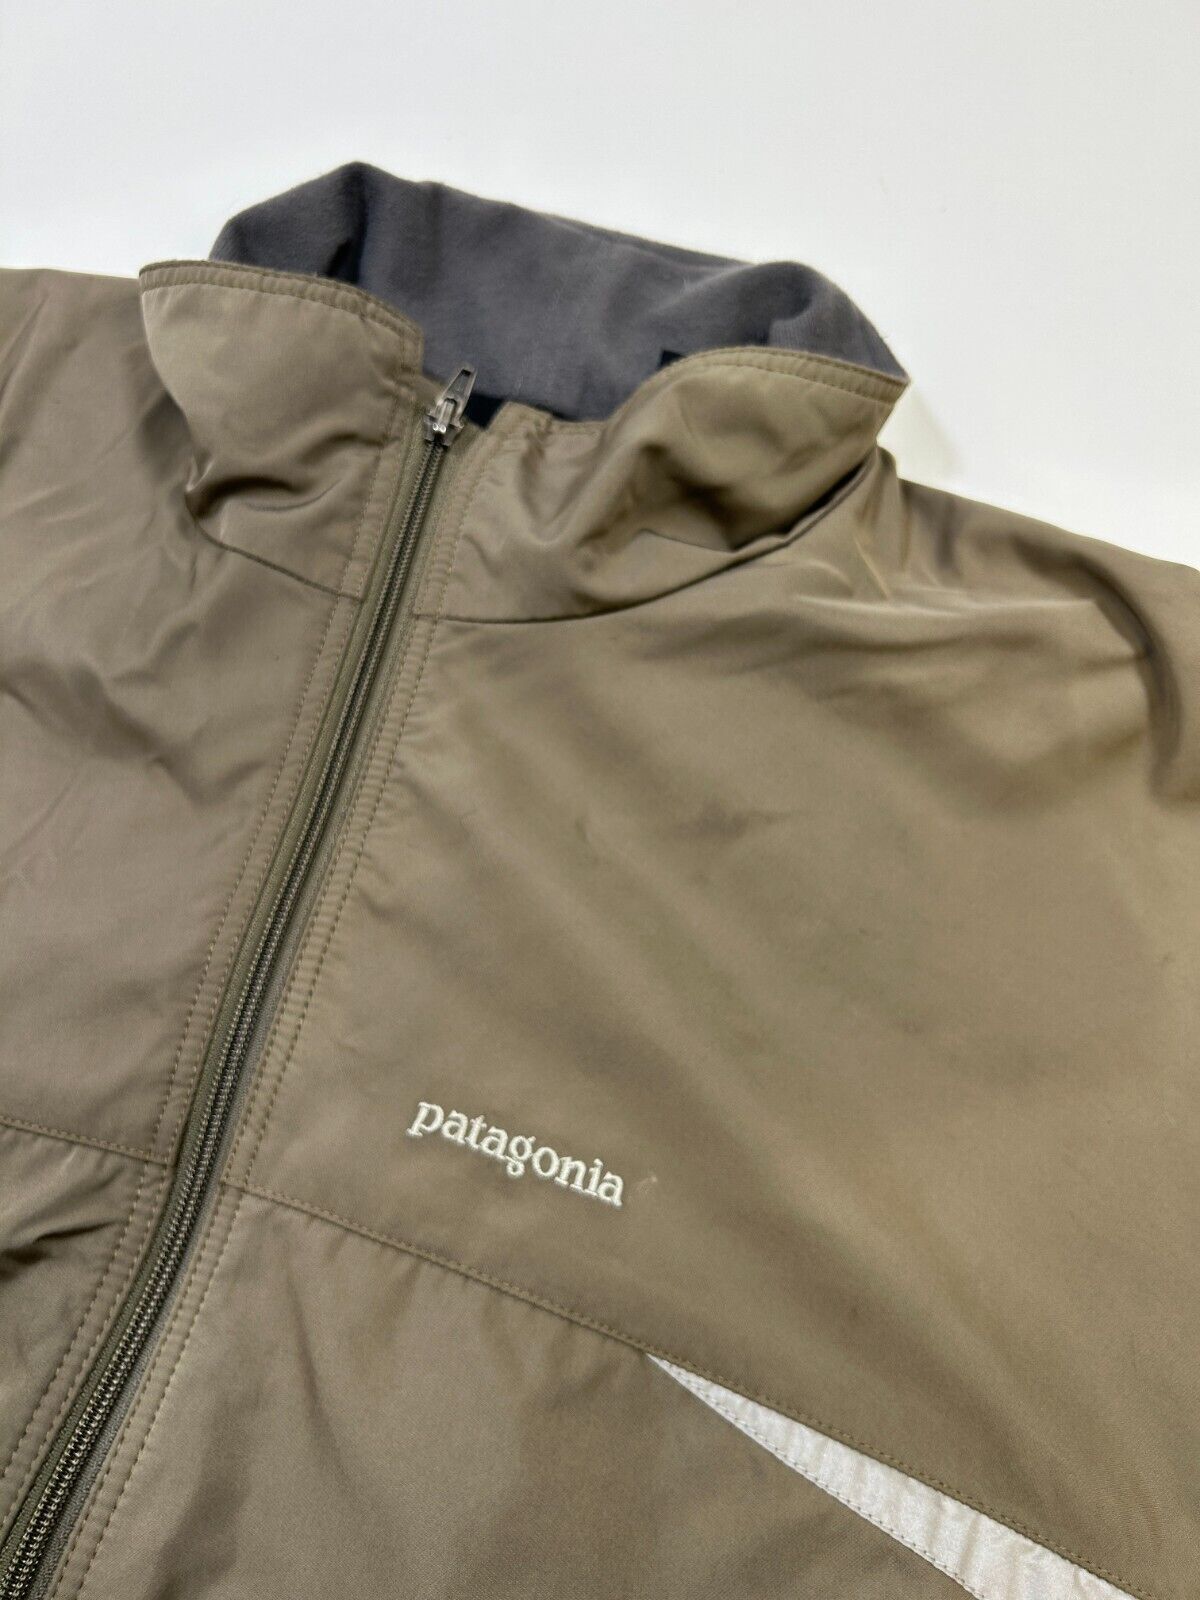 Vintage Patagonia Earth Tone Light Weight Full Zip Shell Jacket Size Large